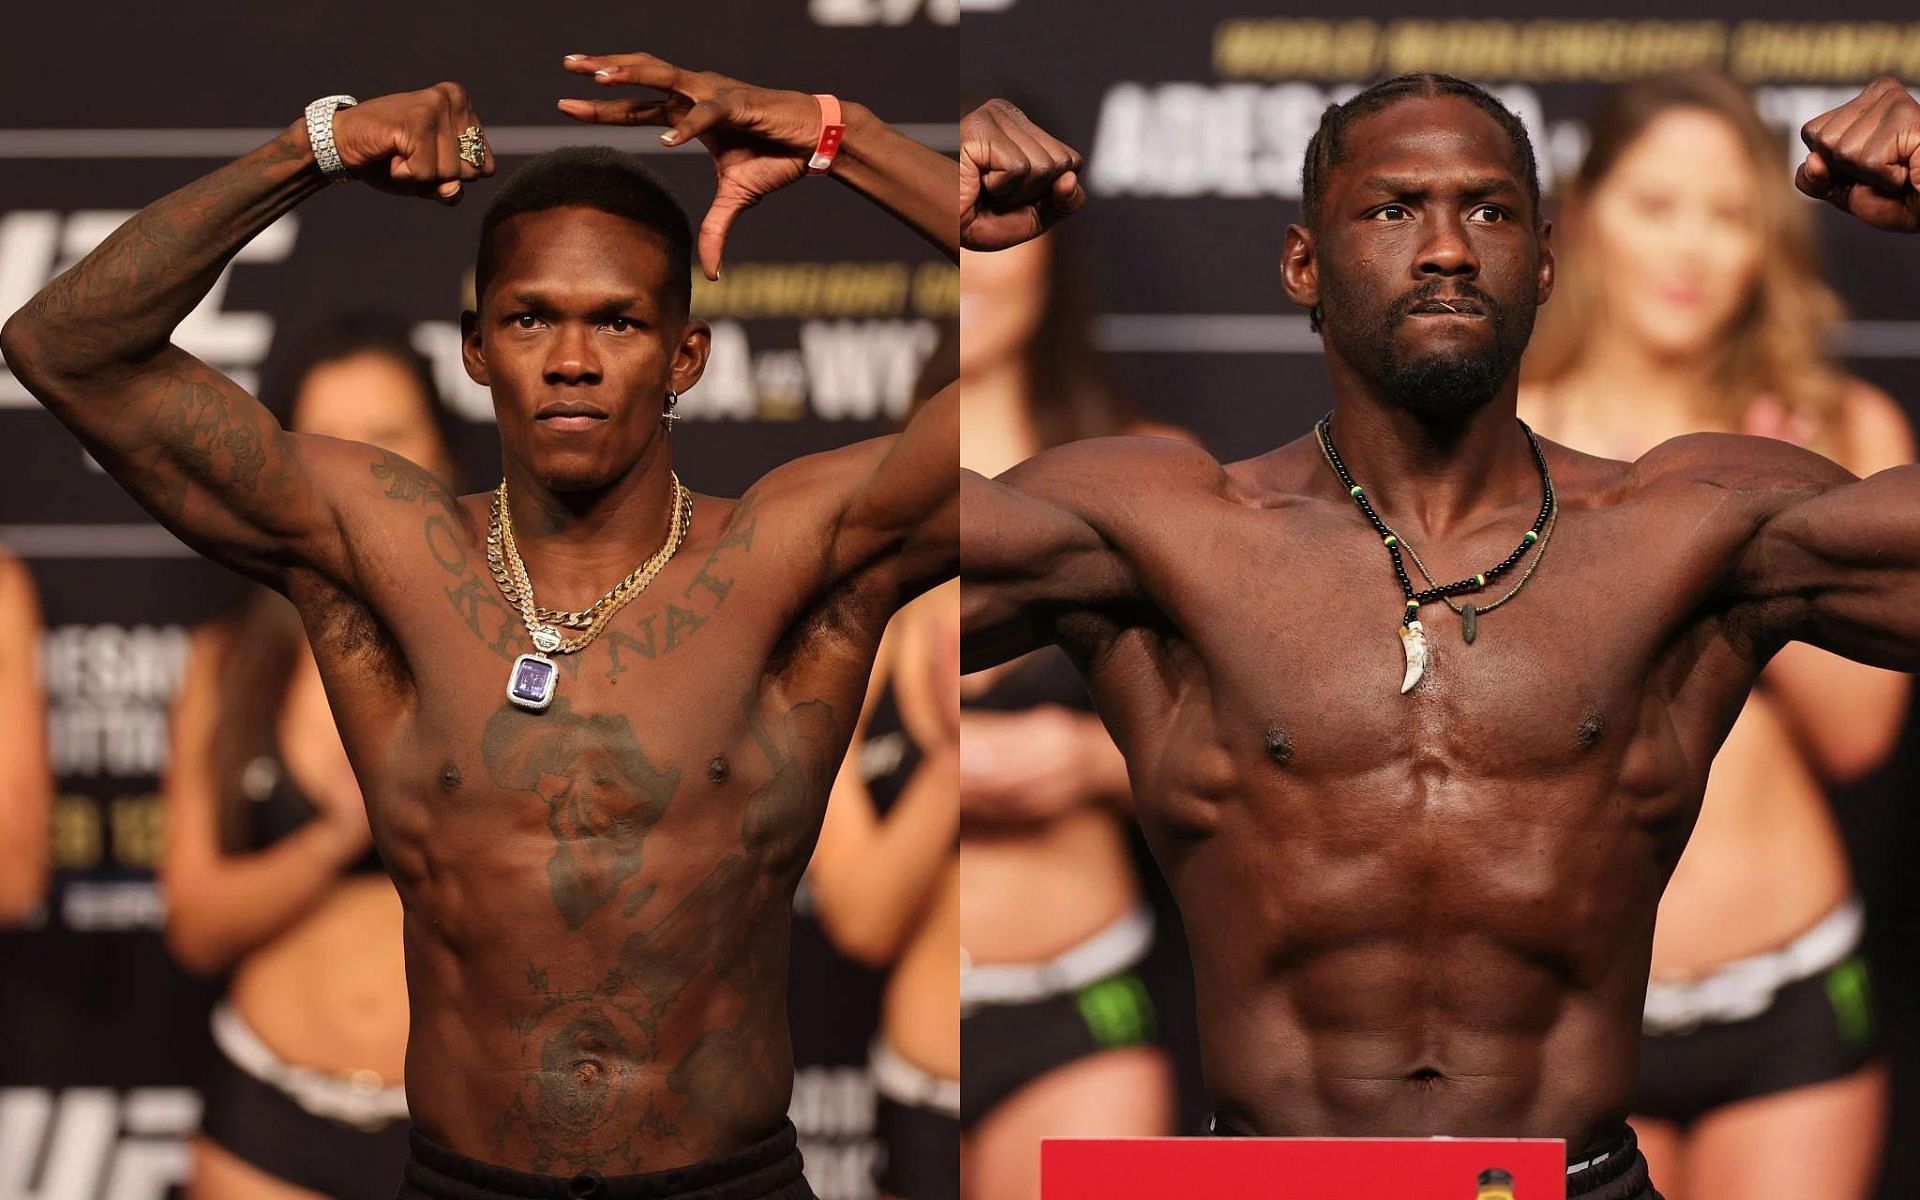 Israel Adesanya (left) and Jared Cannonier (right) [Images courtesy of Getty]